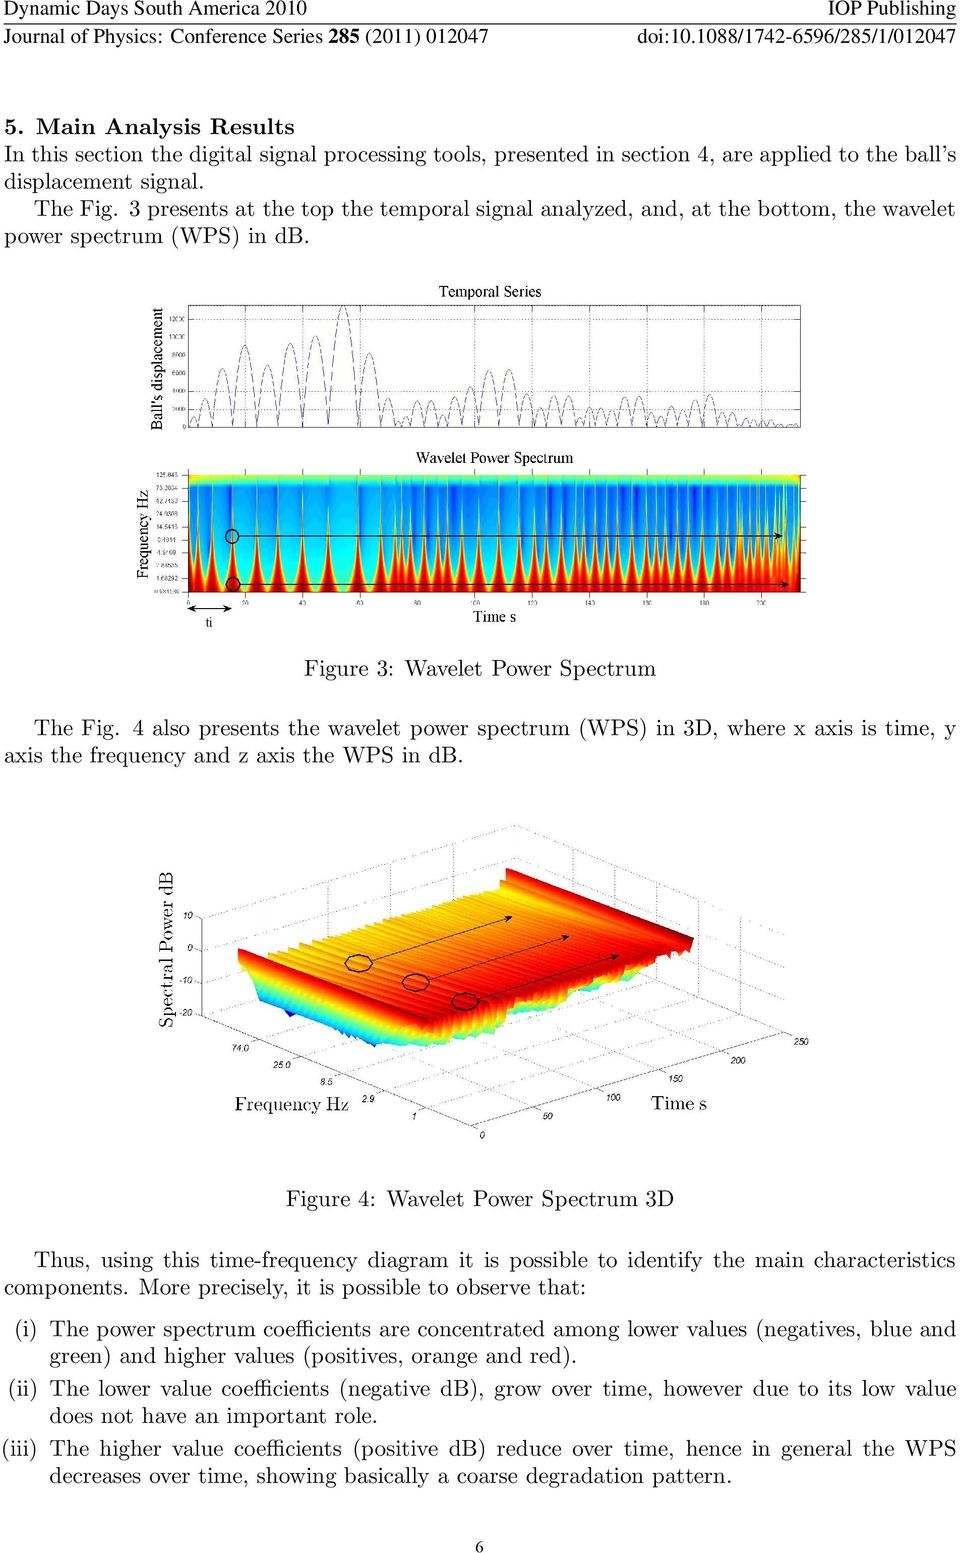 4 also presents the wavelet power spectrum (WPS) in 3D, where x axis is time, y axis the frequency and z axis the WPS in db.